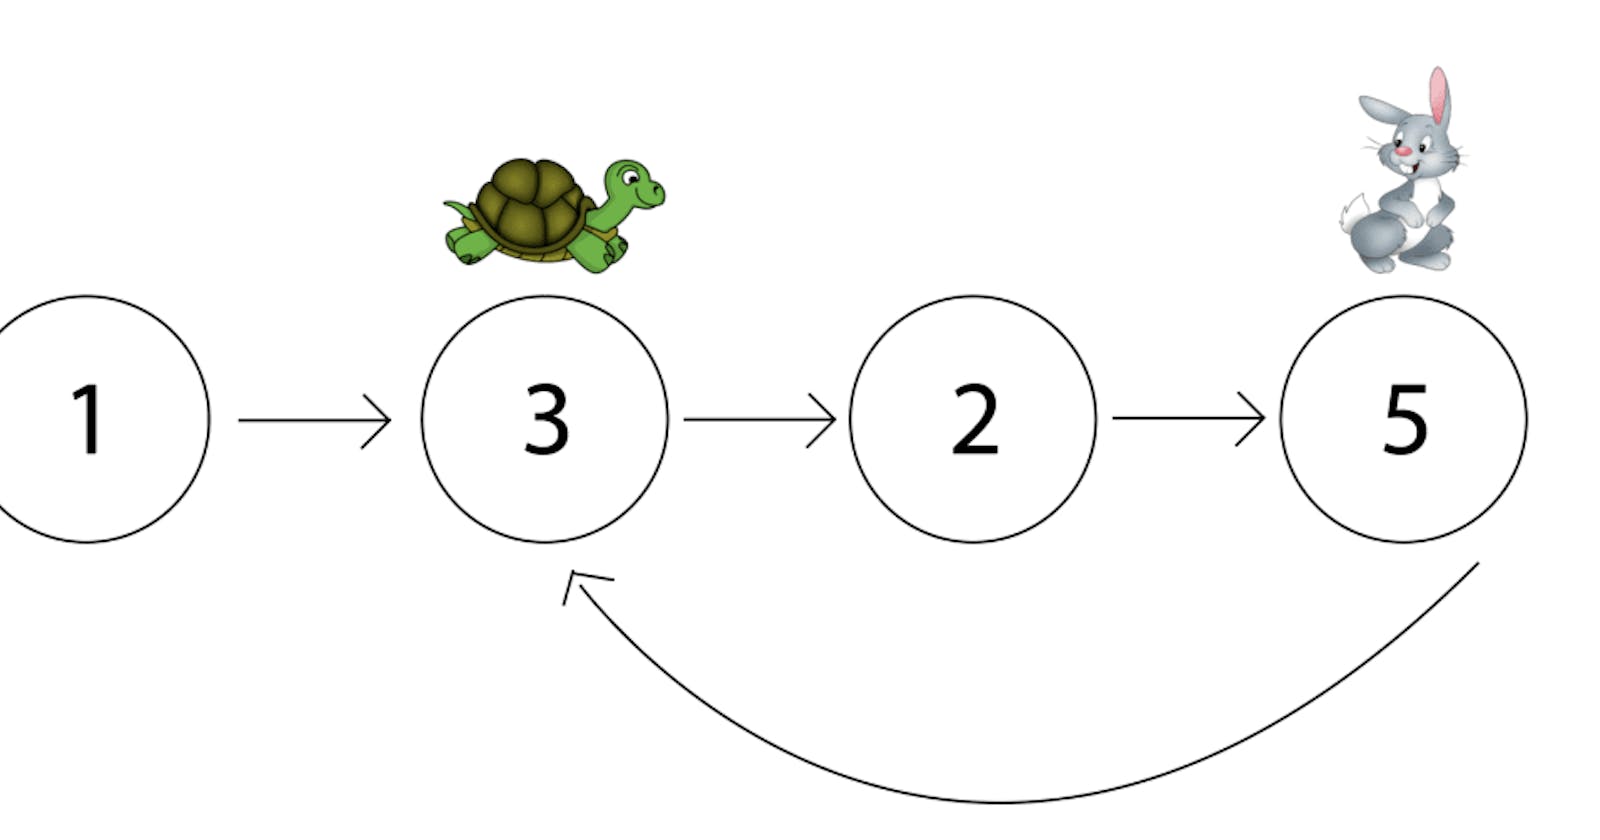 Exploring Floyd's Cycle-Finding Algorithm: Detecting Repeating Patterns in Python